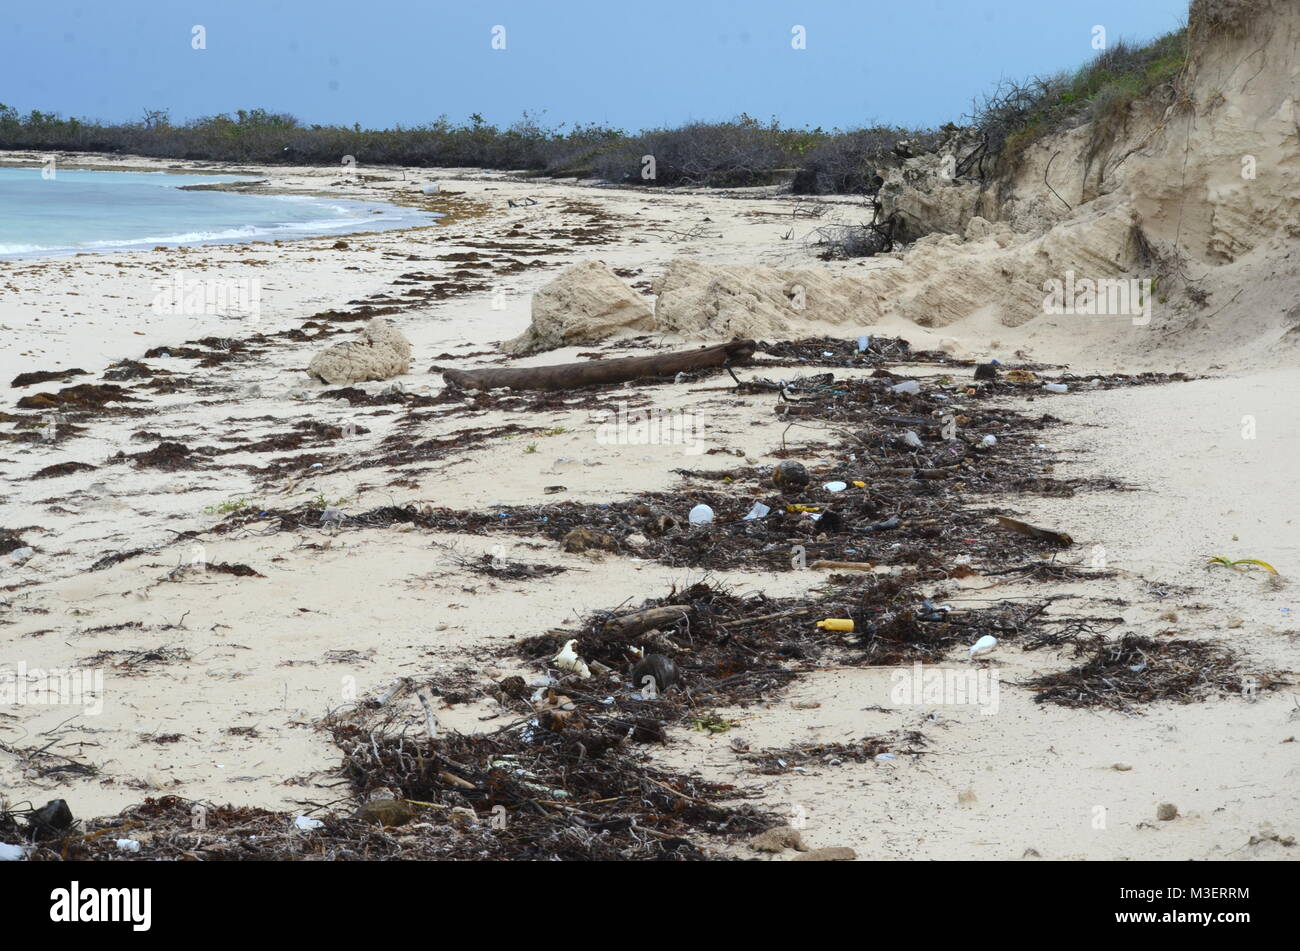 Garbage, plastic waste and heaps of dead marine plants and animals washed out on a beach in Cayo Coco Cuba after a destructive storm and hurricane. Stock Photo